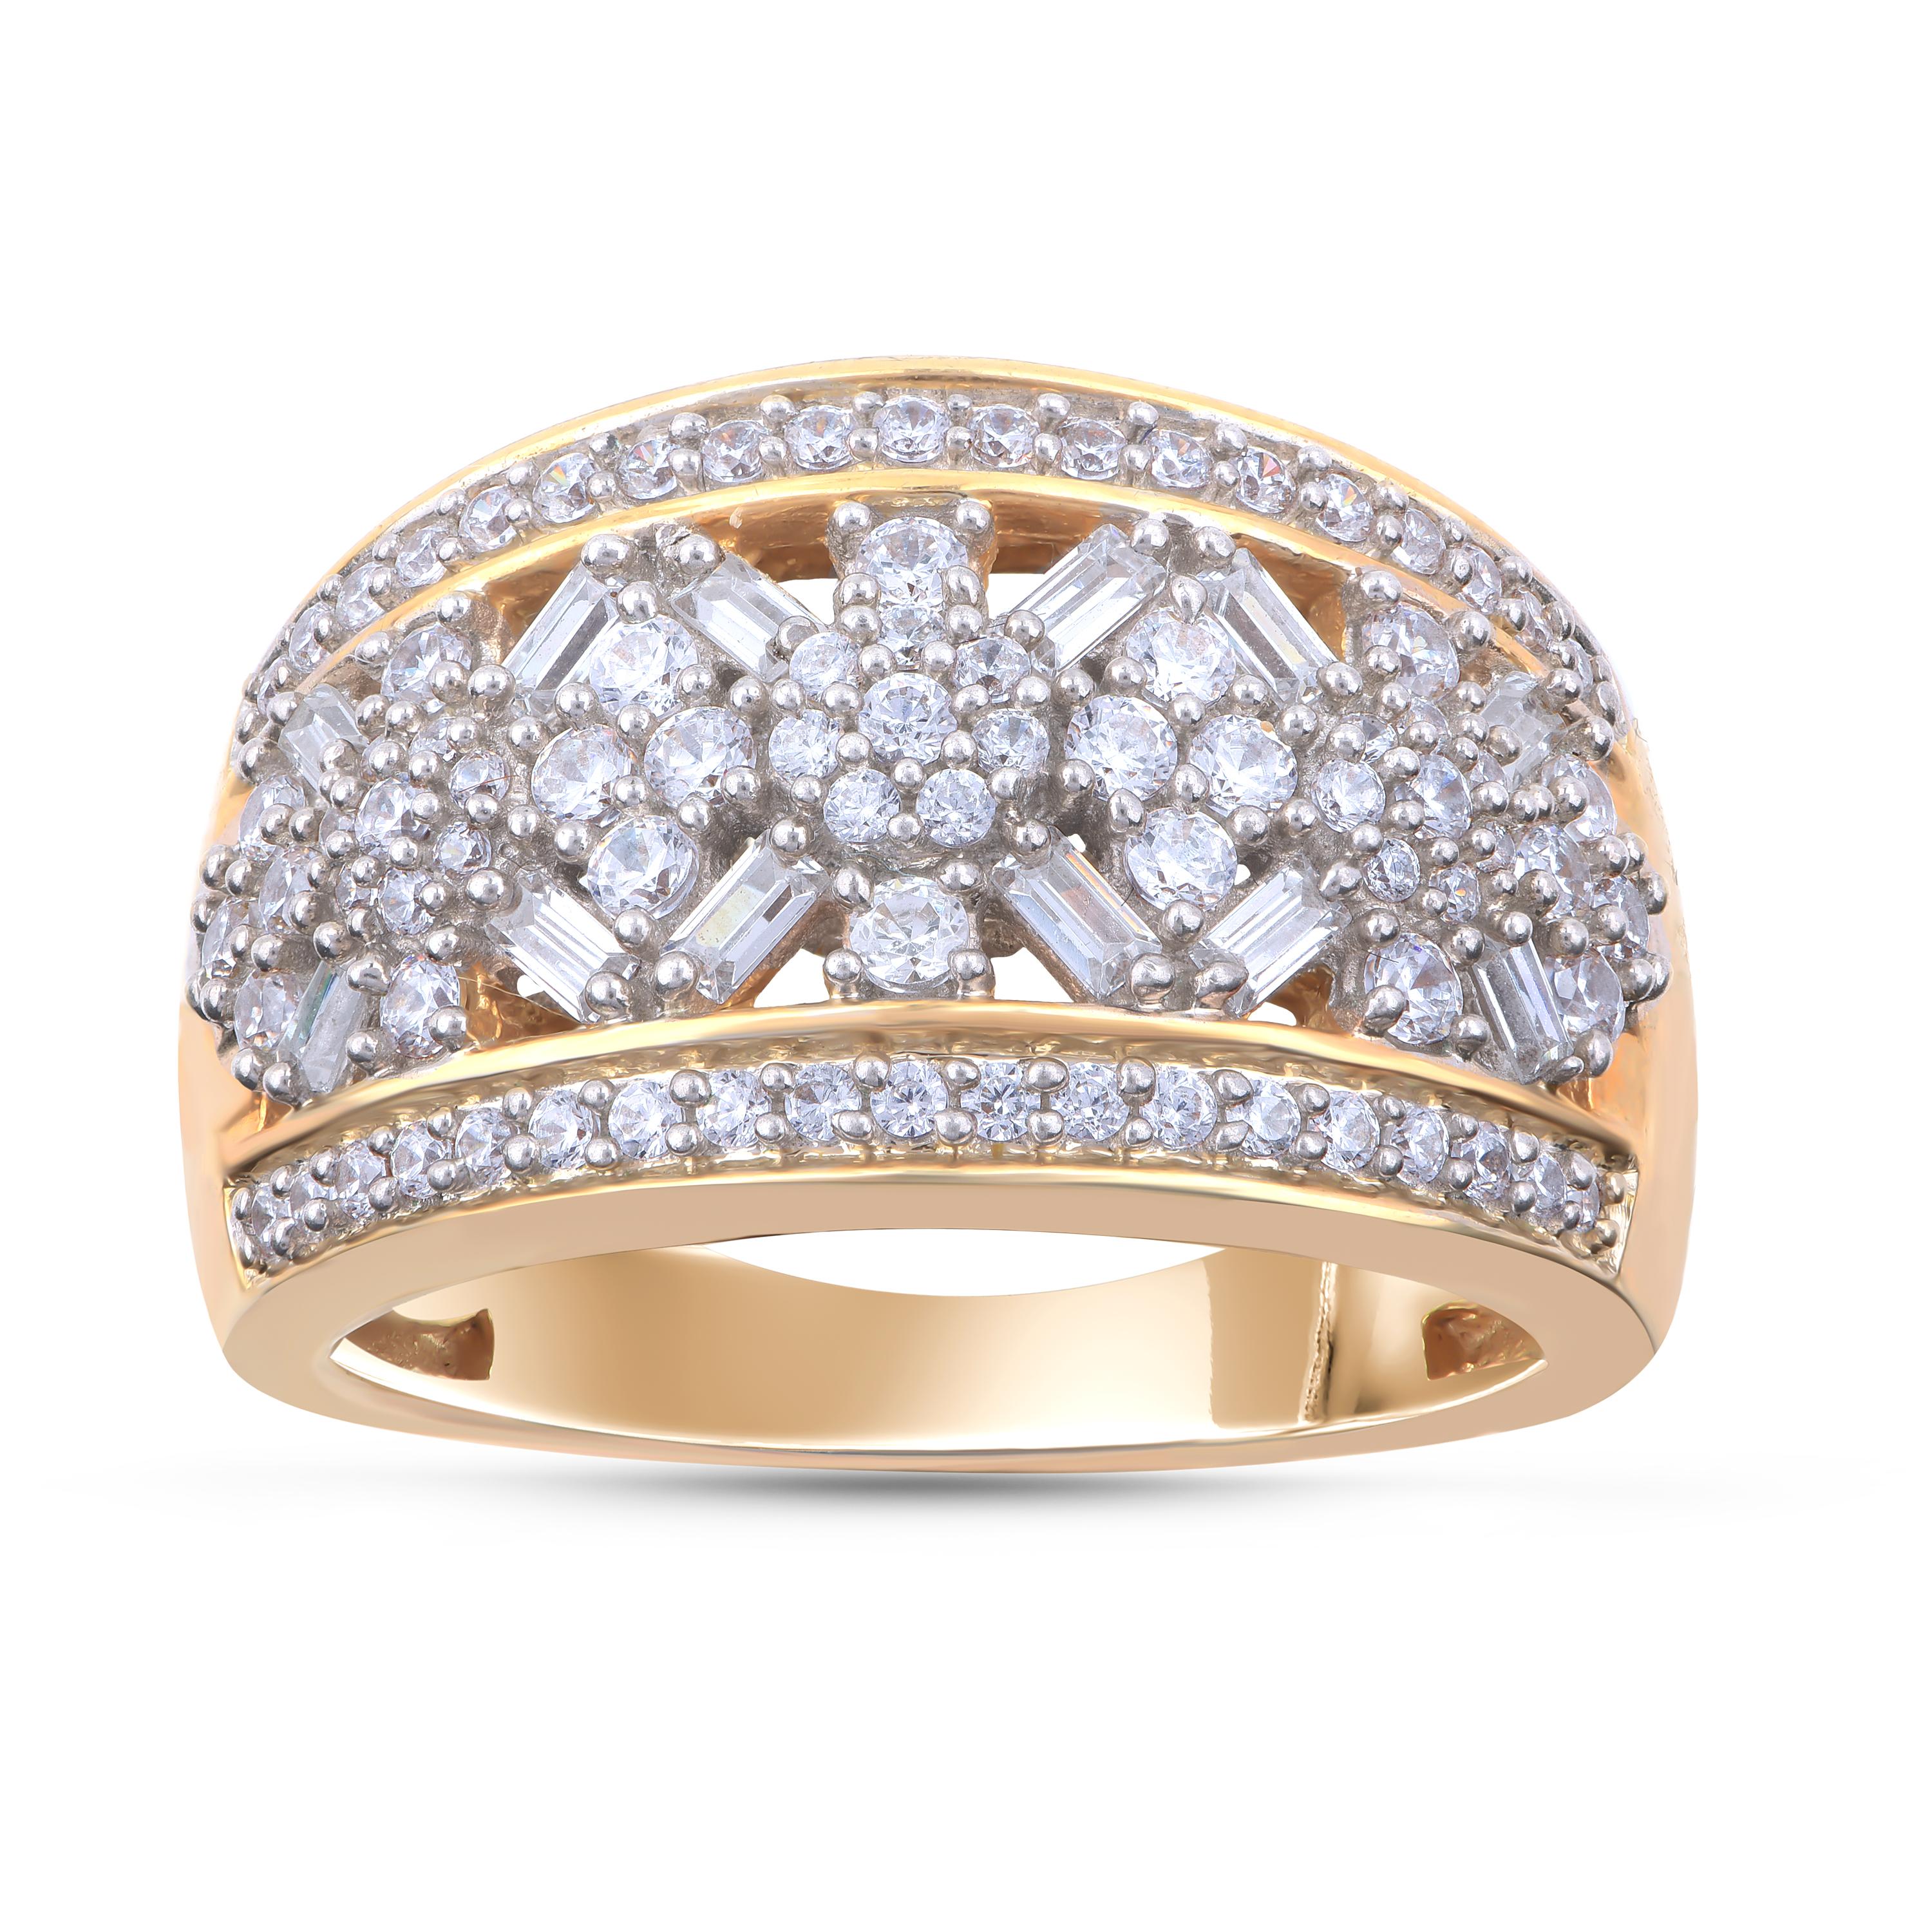 This gorgeous ring dazzles with 84 brilliant and 12 baguette shape diamonds in pave and prong setting and expertly crafted in 18-karat yellow gold. The diamonds are graded H-I Color, I2 Clarity. 

Metal color and ring size can be customized on